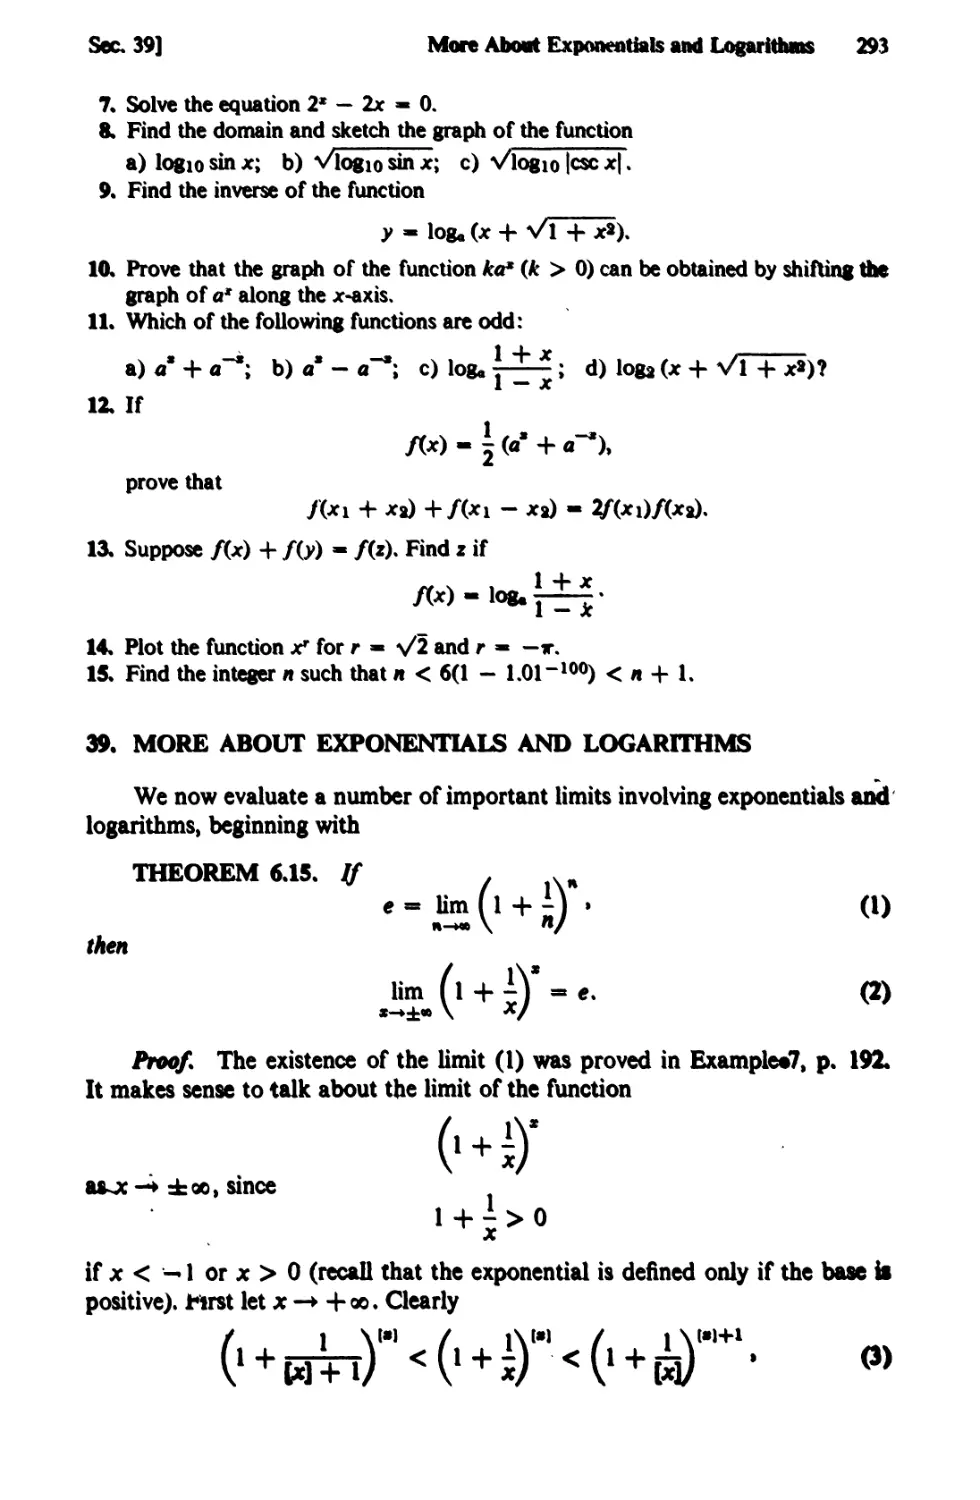 39. More About Exponentials and Logarithms